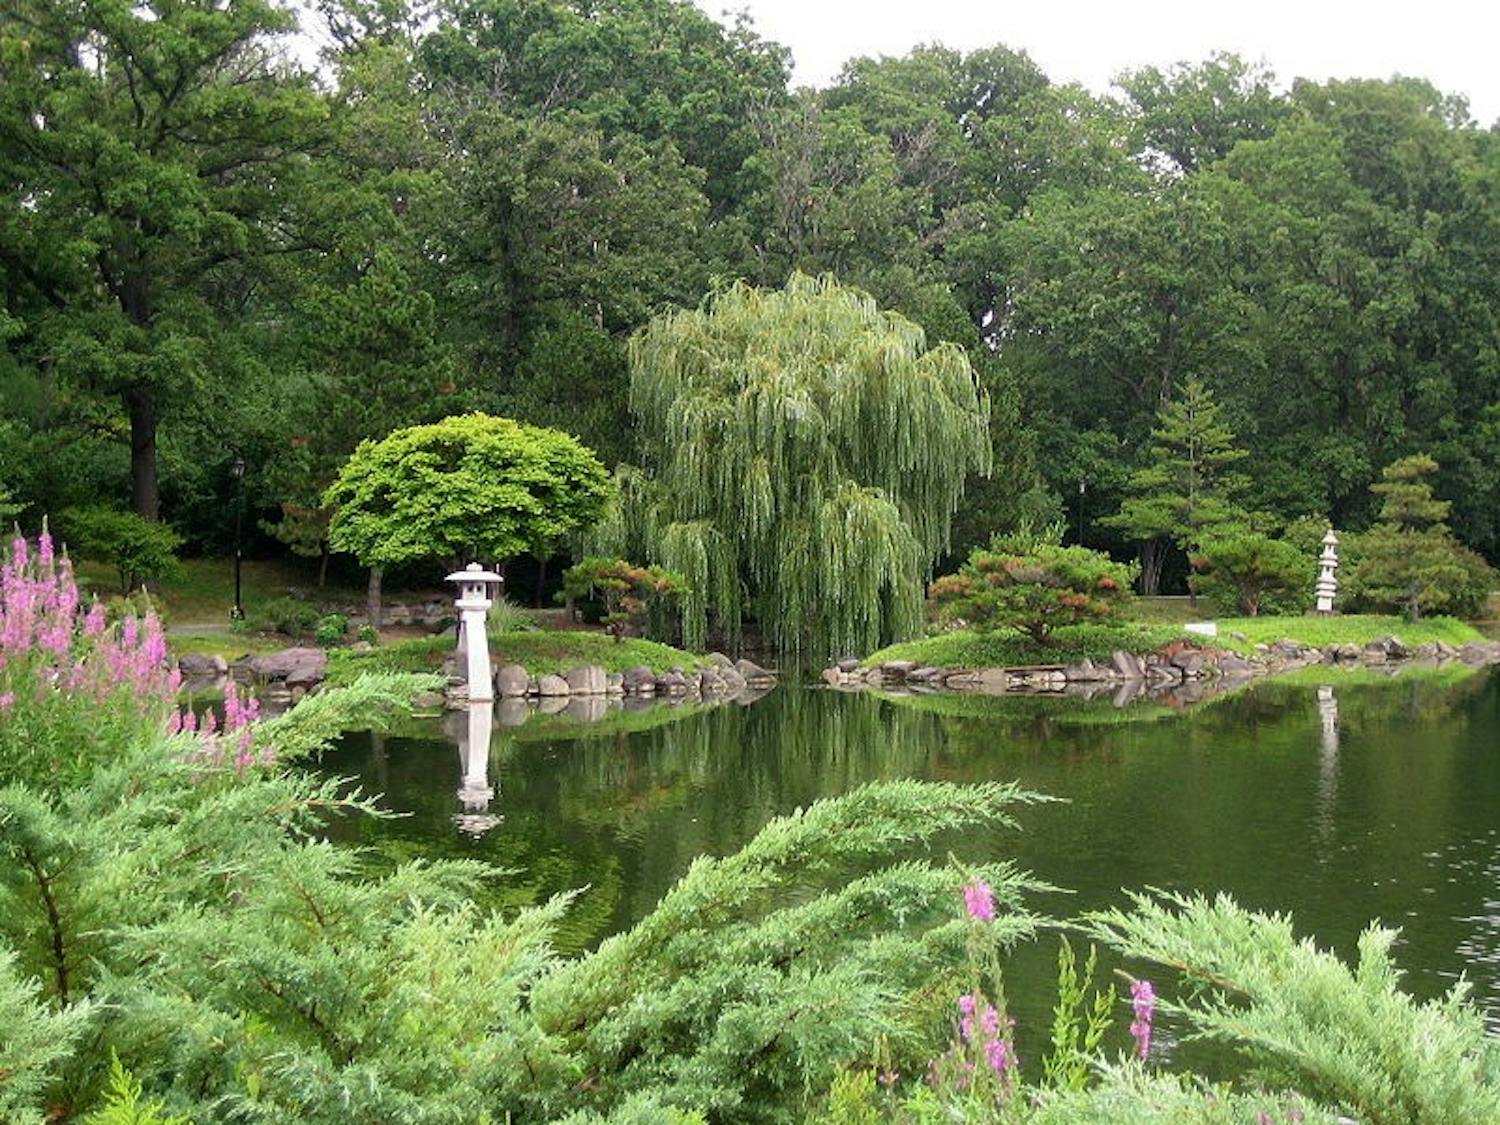 The Japanese Garden of Buffalo is located adjacent to The Buffalo History Museum.&nbsp;